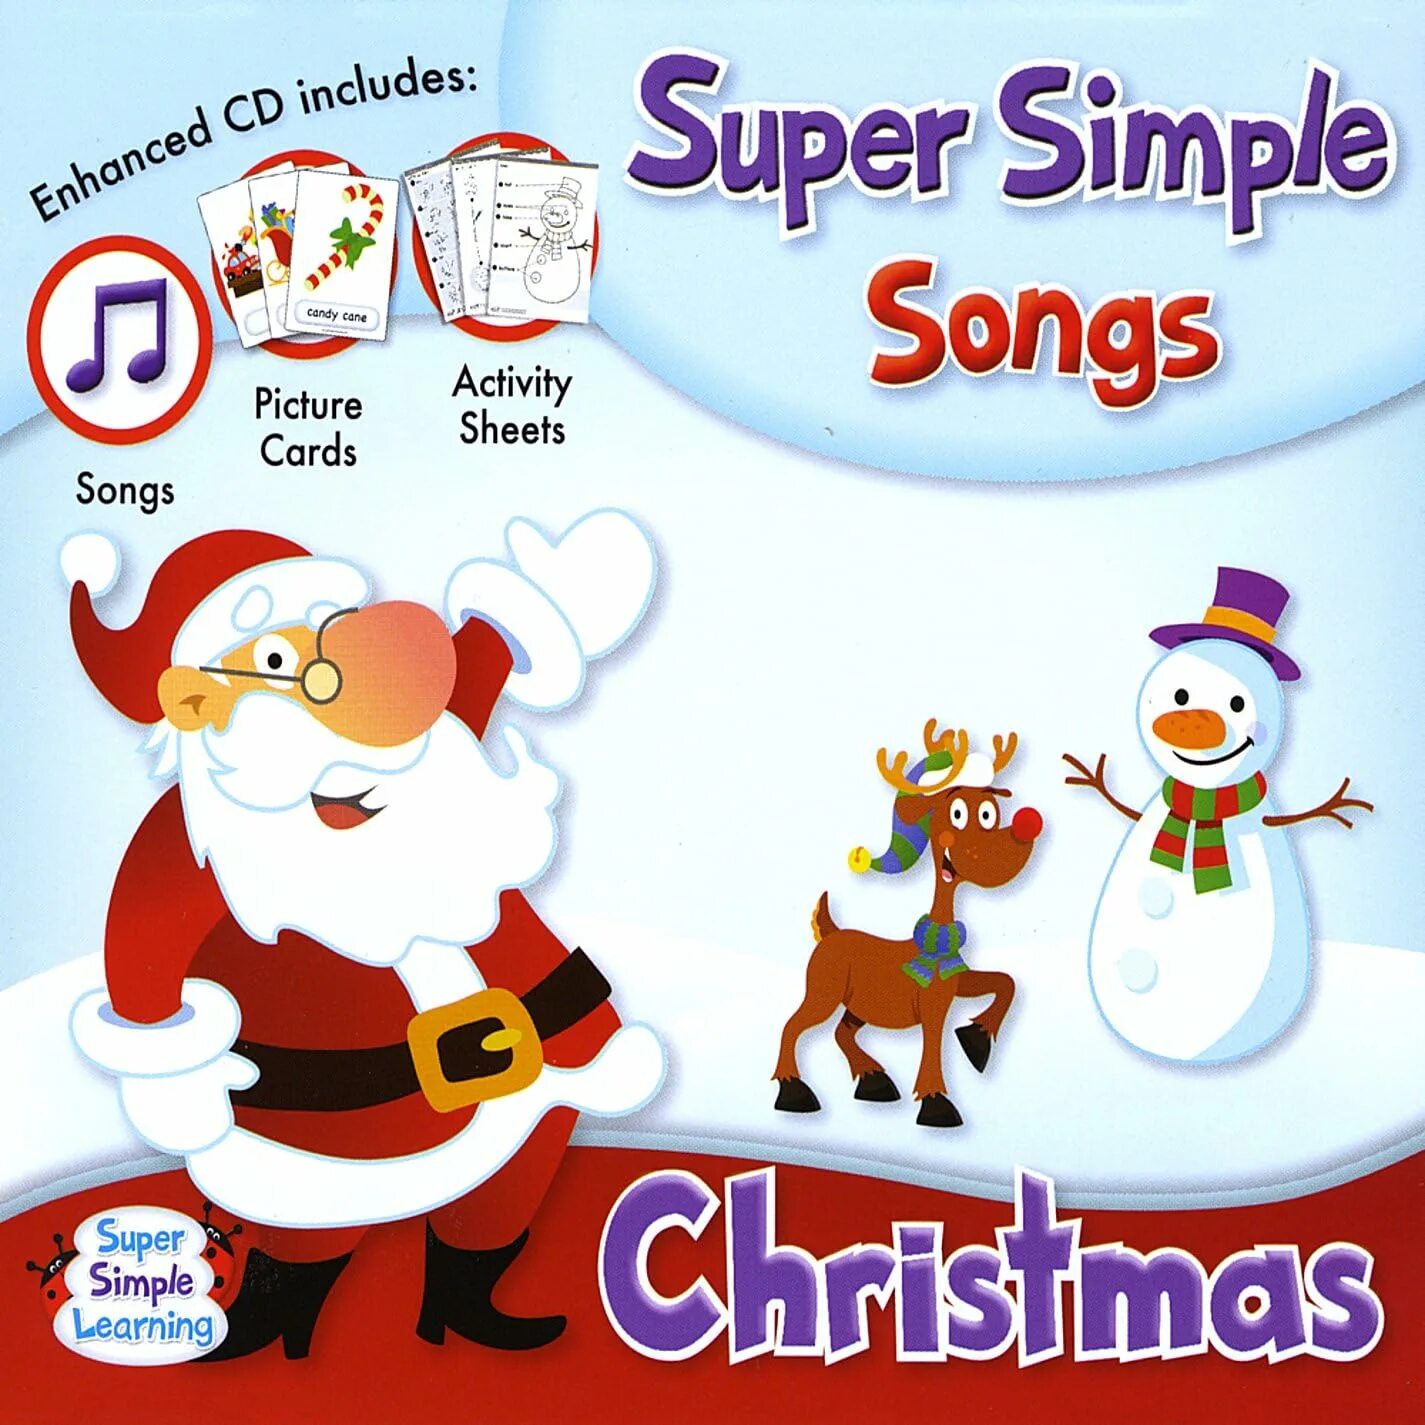 Super simple Songs. Super simple Learning. Super simple Learning Songs. Super simple Songs Christmas. Simply songs